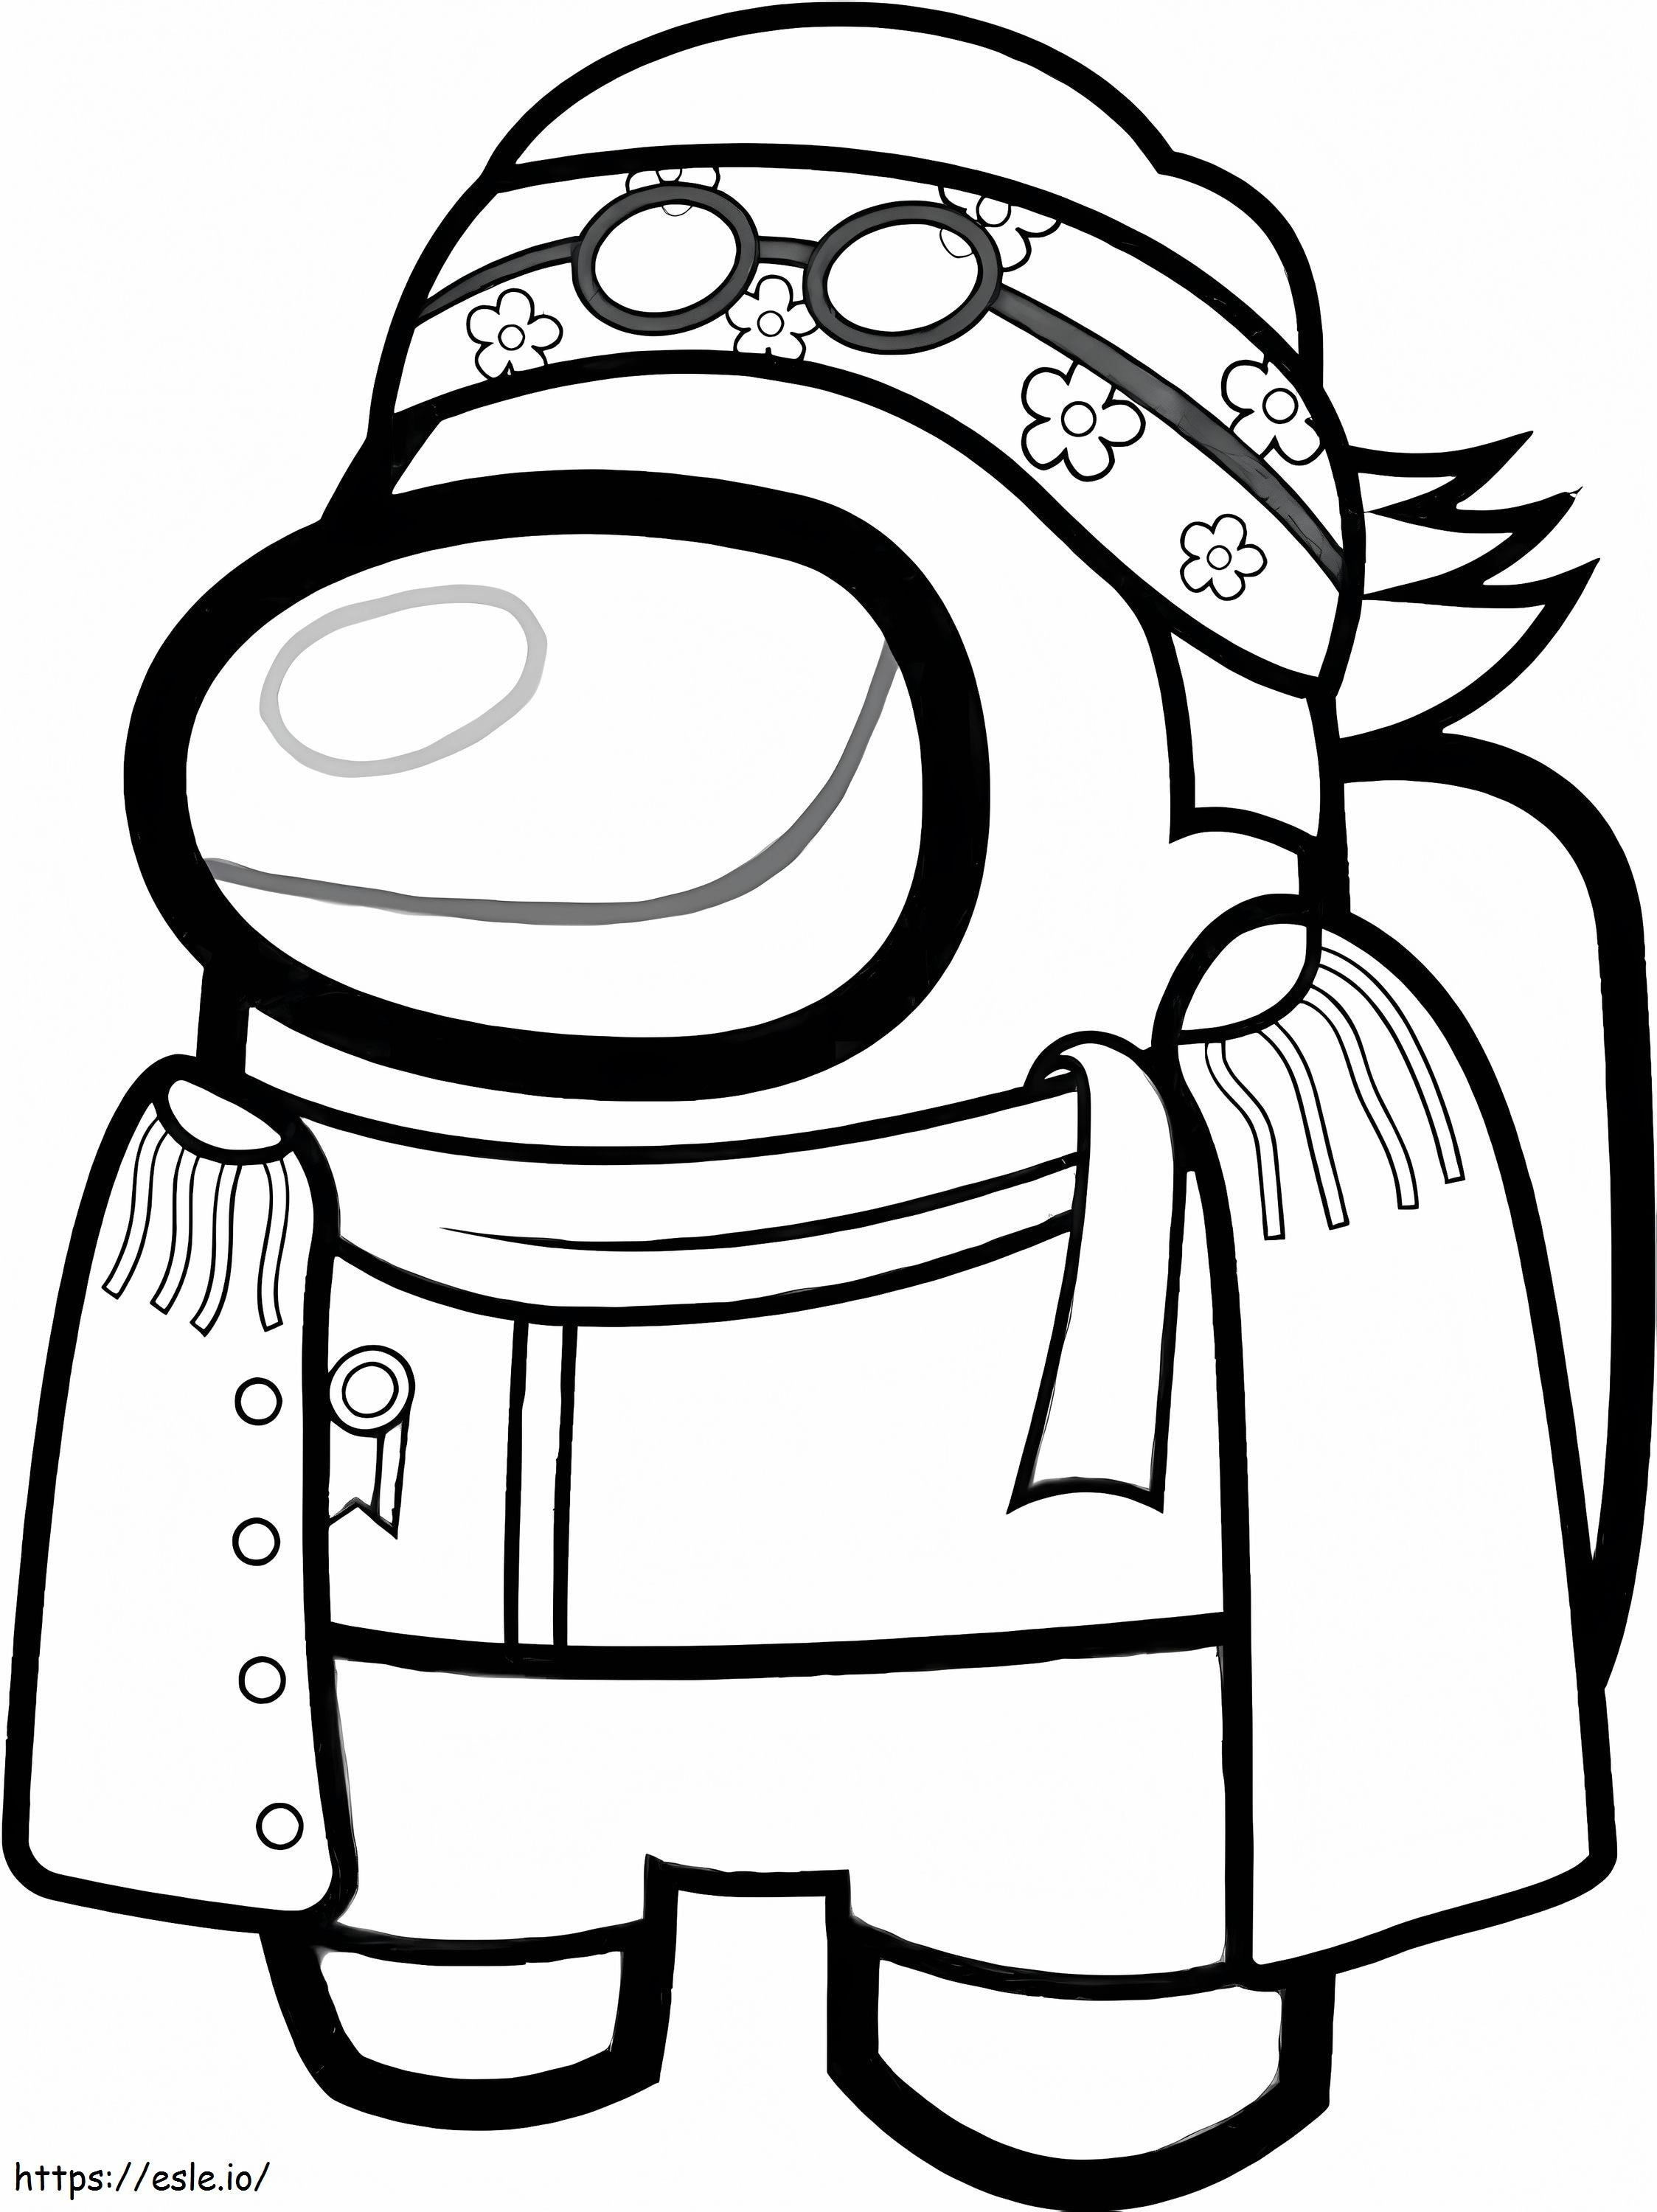 Coby Among Us 1 coloring page